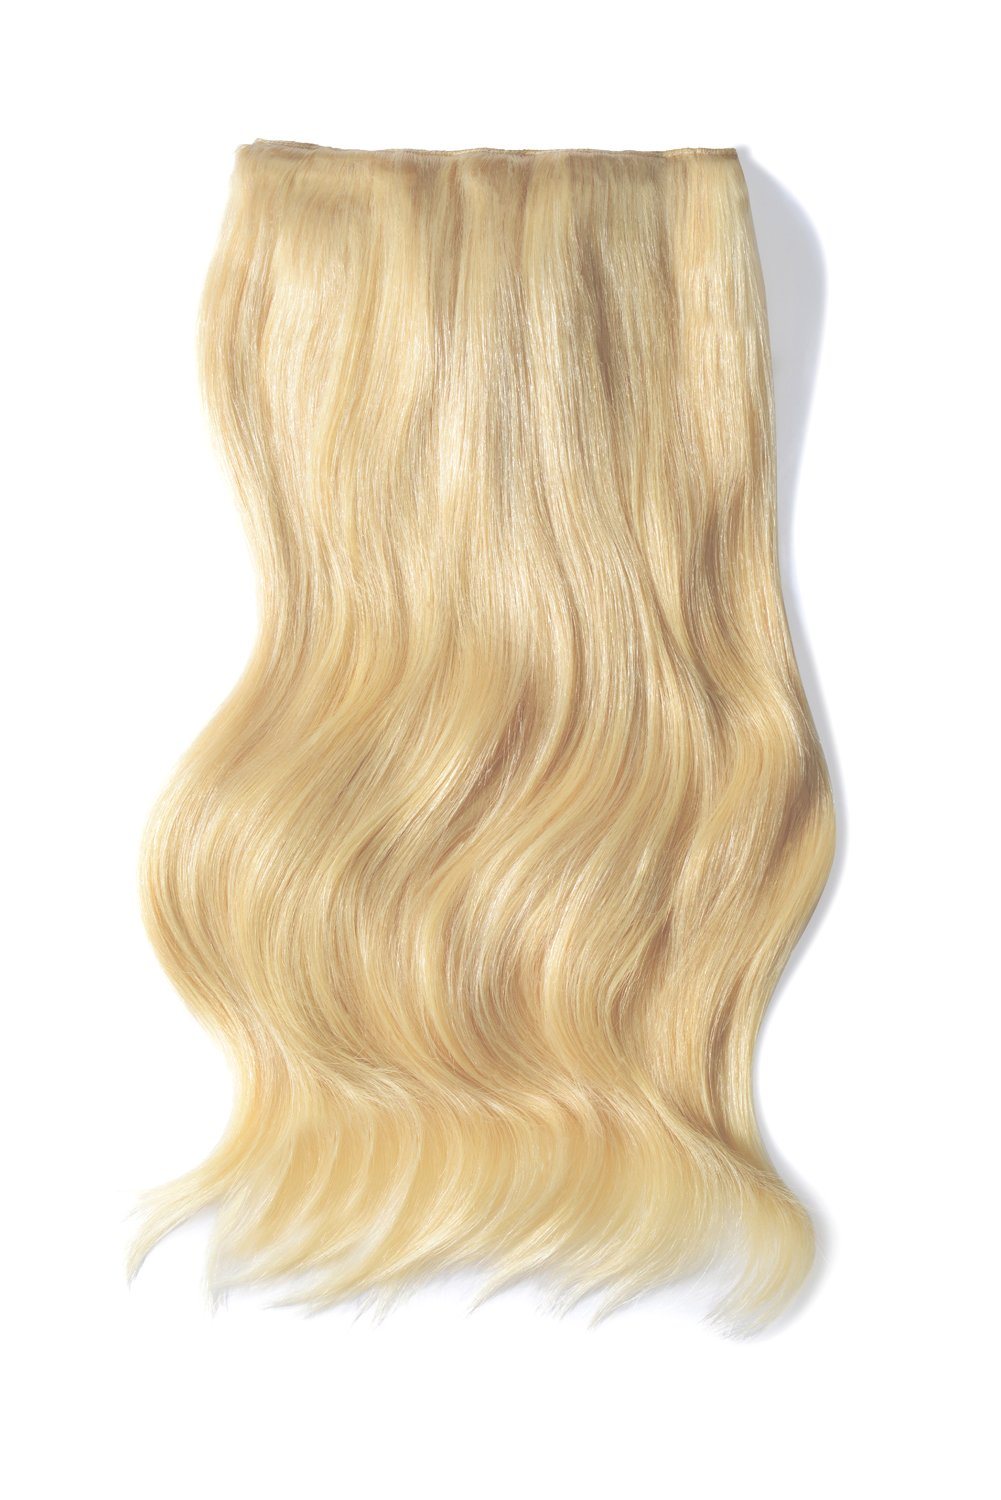 Double Wefted Full Head Remy Clip in Human Hair Extensions - Bleach Blonde (613)